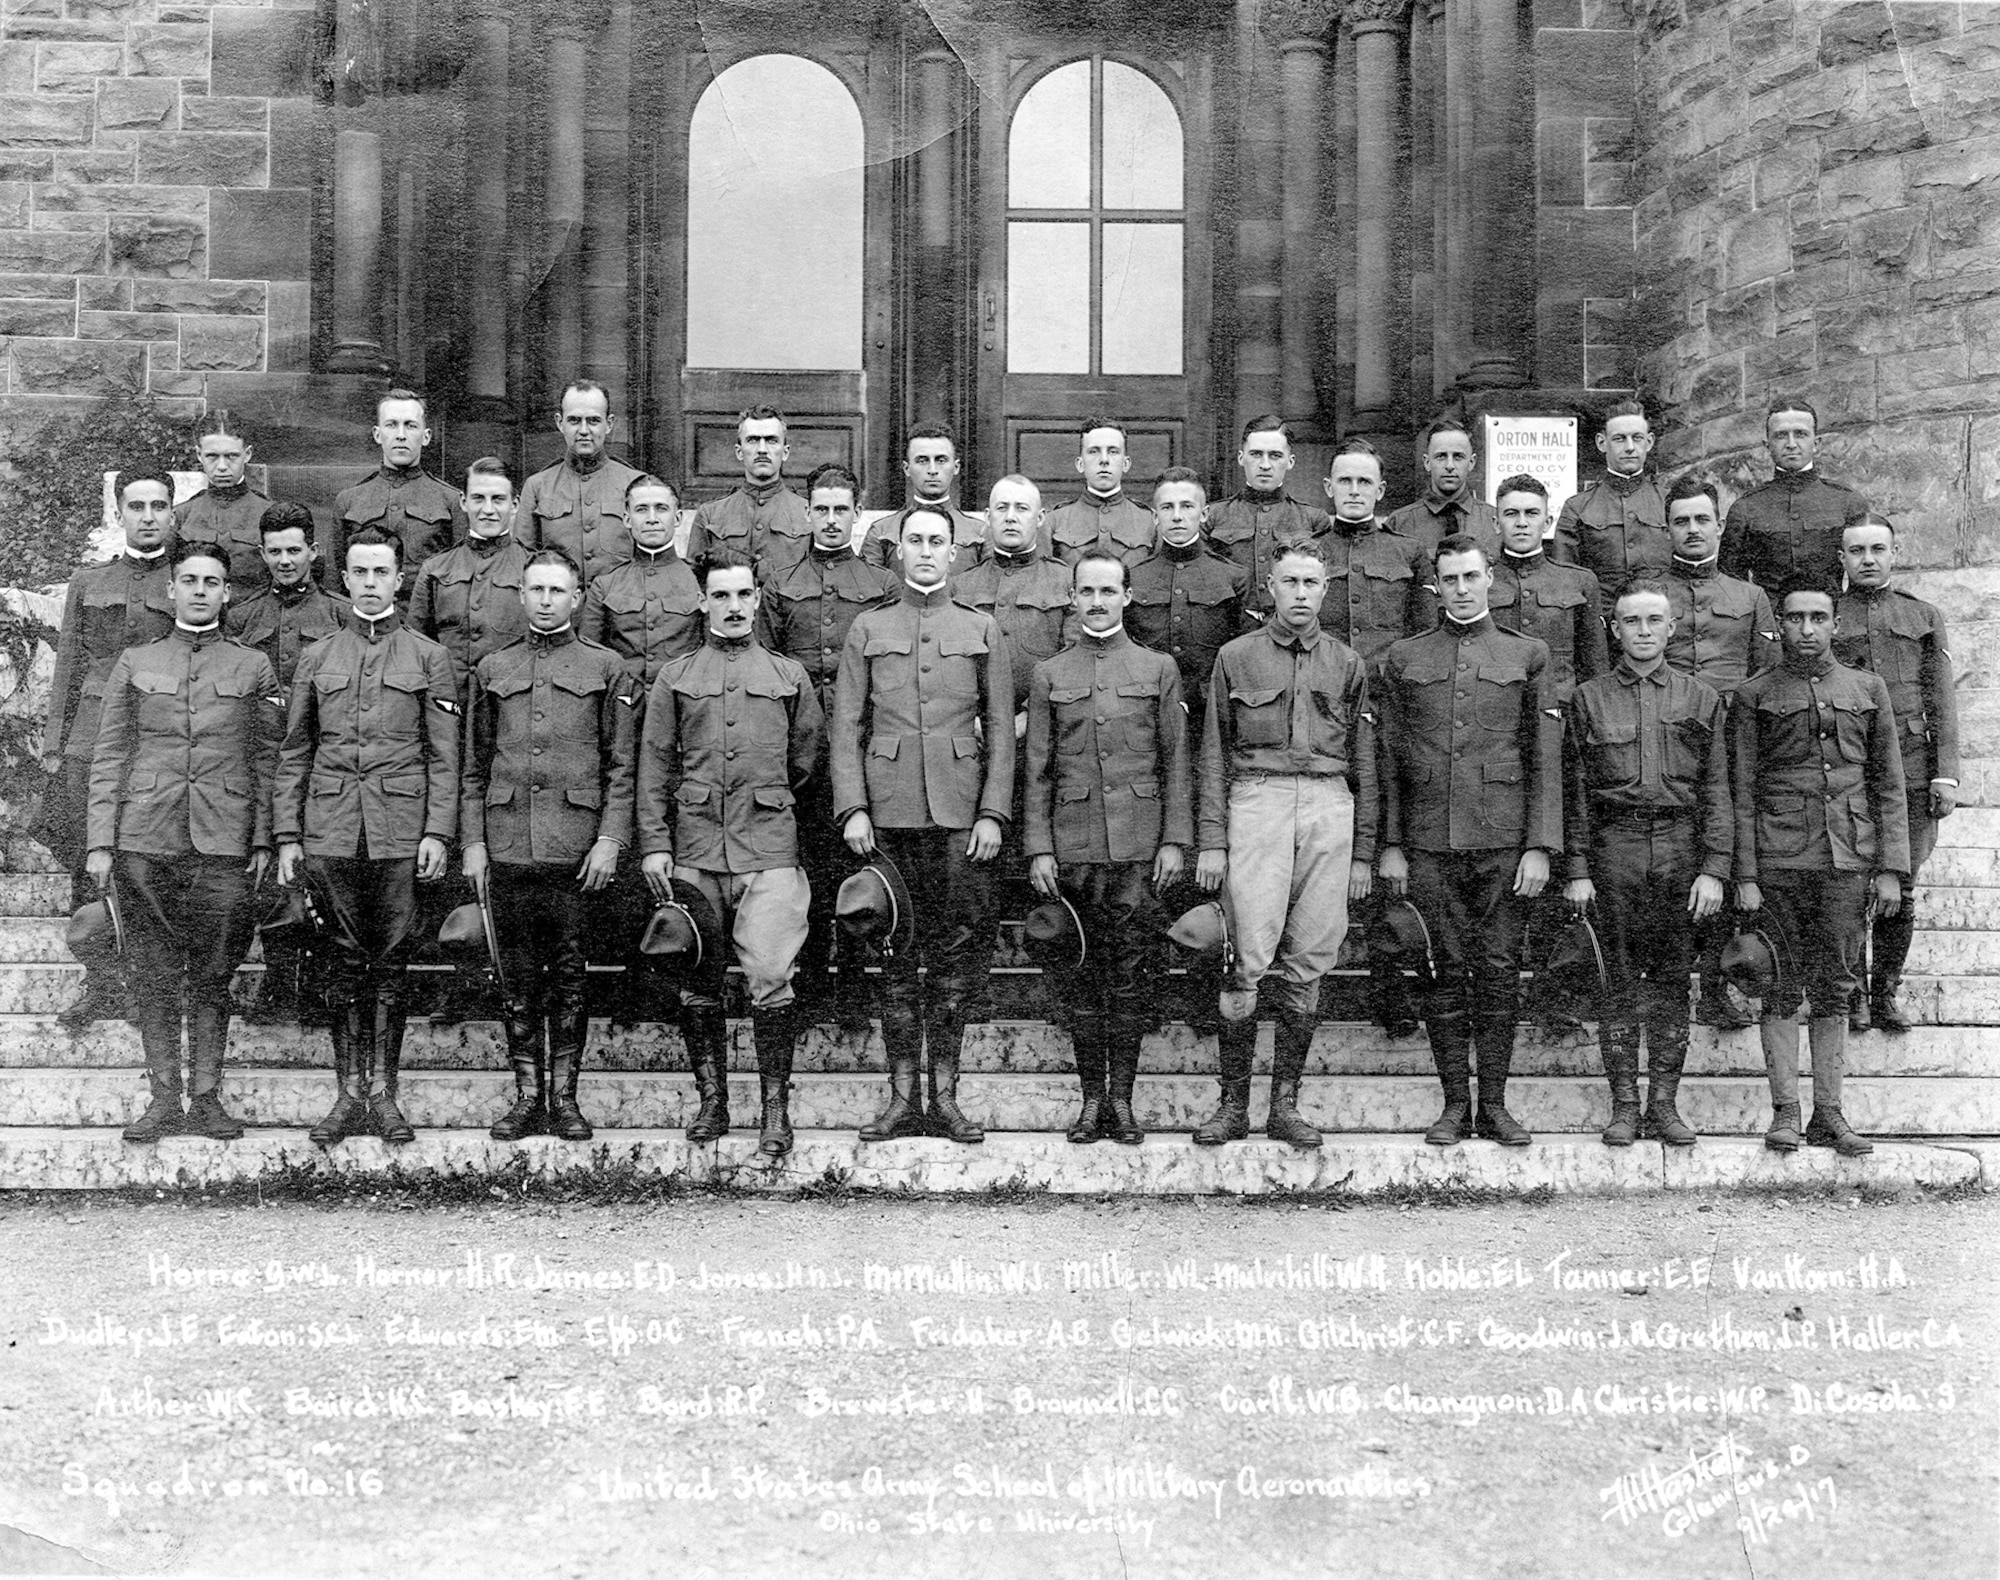 As World War I continued throughout Europe, it quickly became apparent that there was a shortage of trained pilots in the United States. The War Department and the U.S. Army formed the Aviation Cadet Training Program, and commissioned six universities across the country to open aviation schools. The Ohio State University opened the School of Military Aeronautics in May 1917. This photograph of Squadron No. 16 was taken on Sept. 24, 1917, on the steps of Orton Hall.